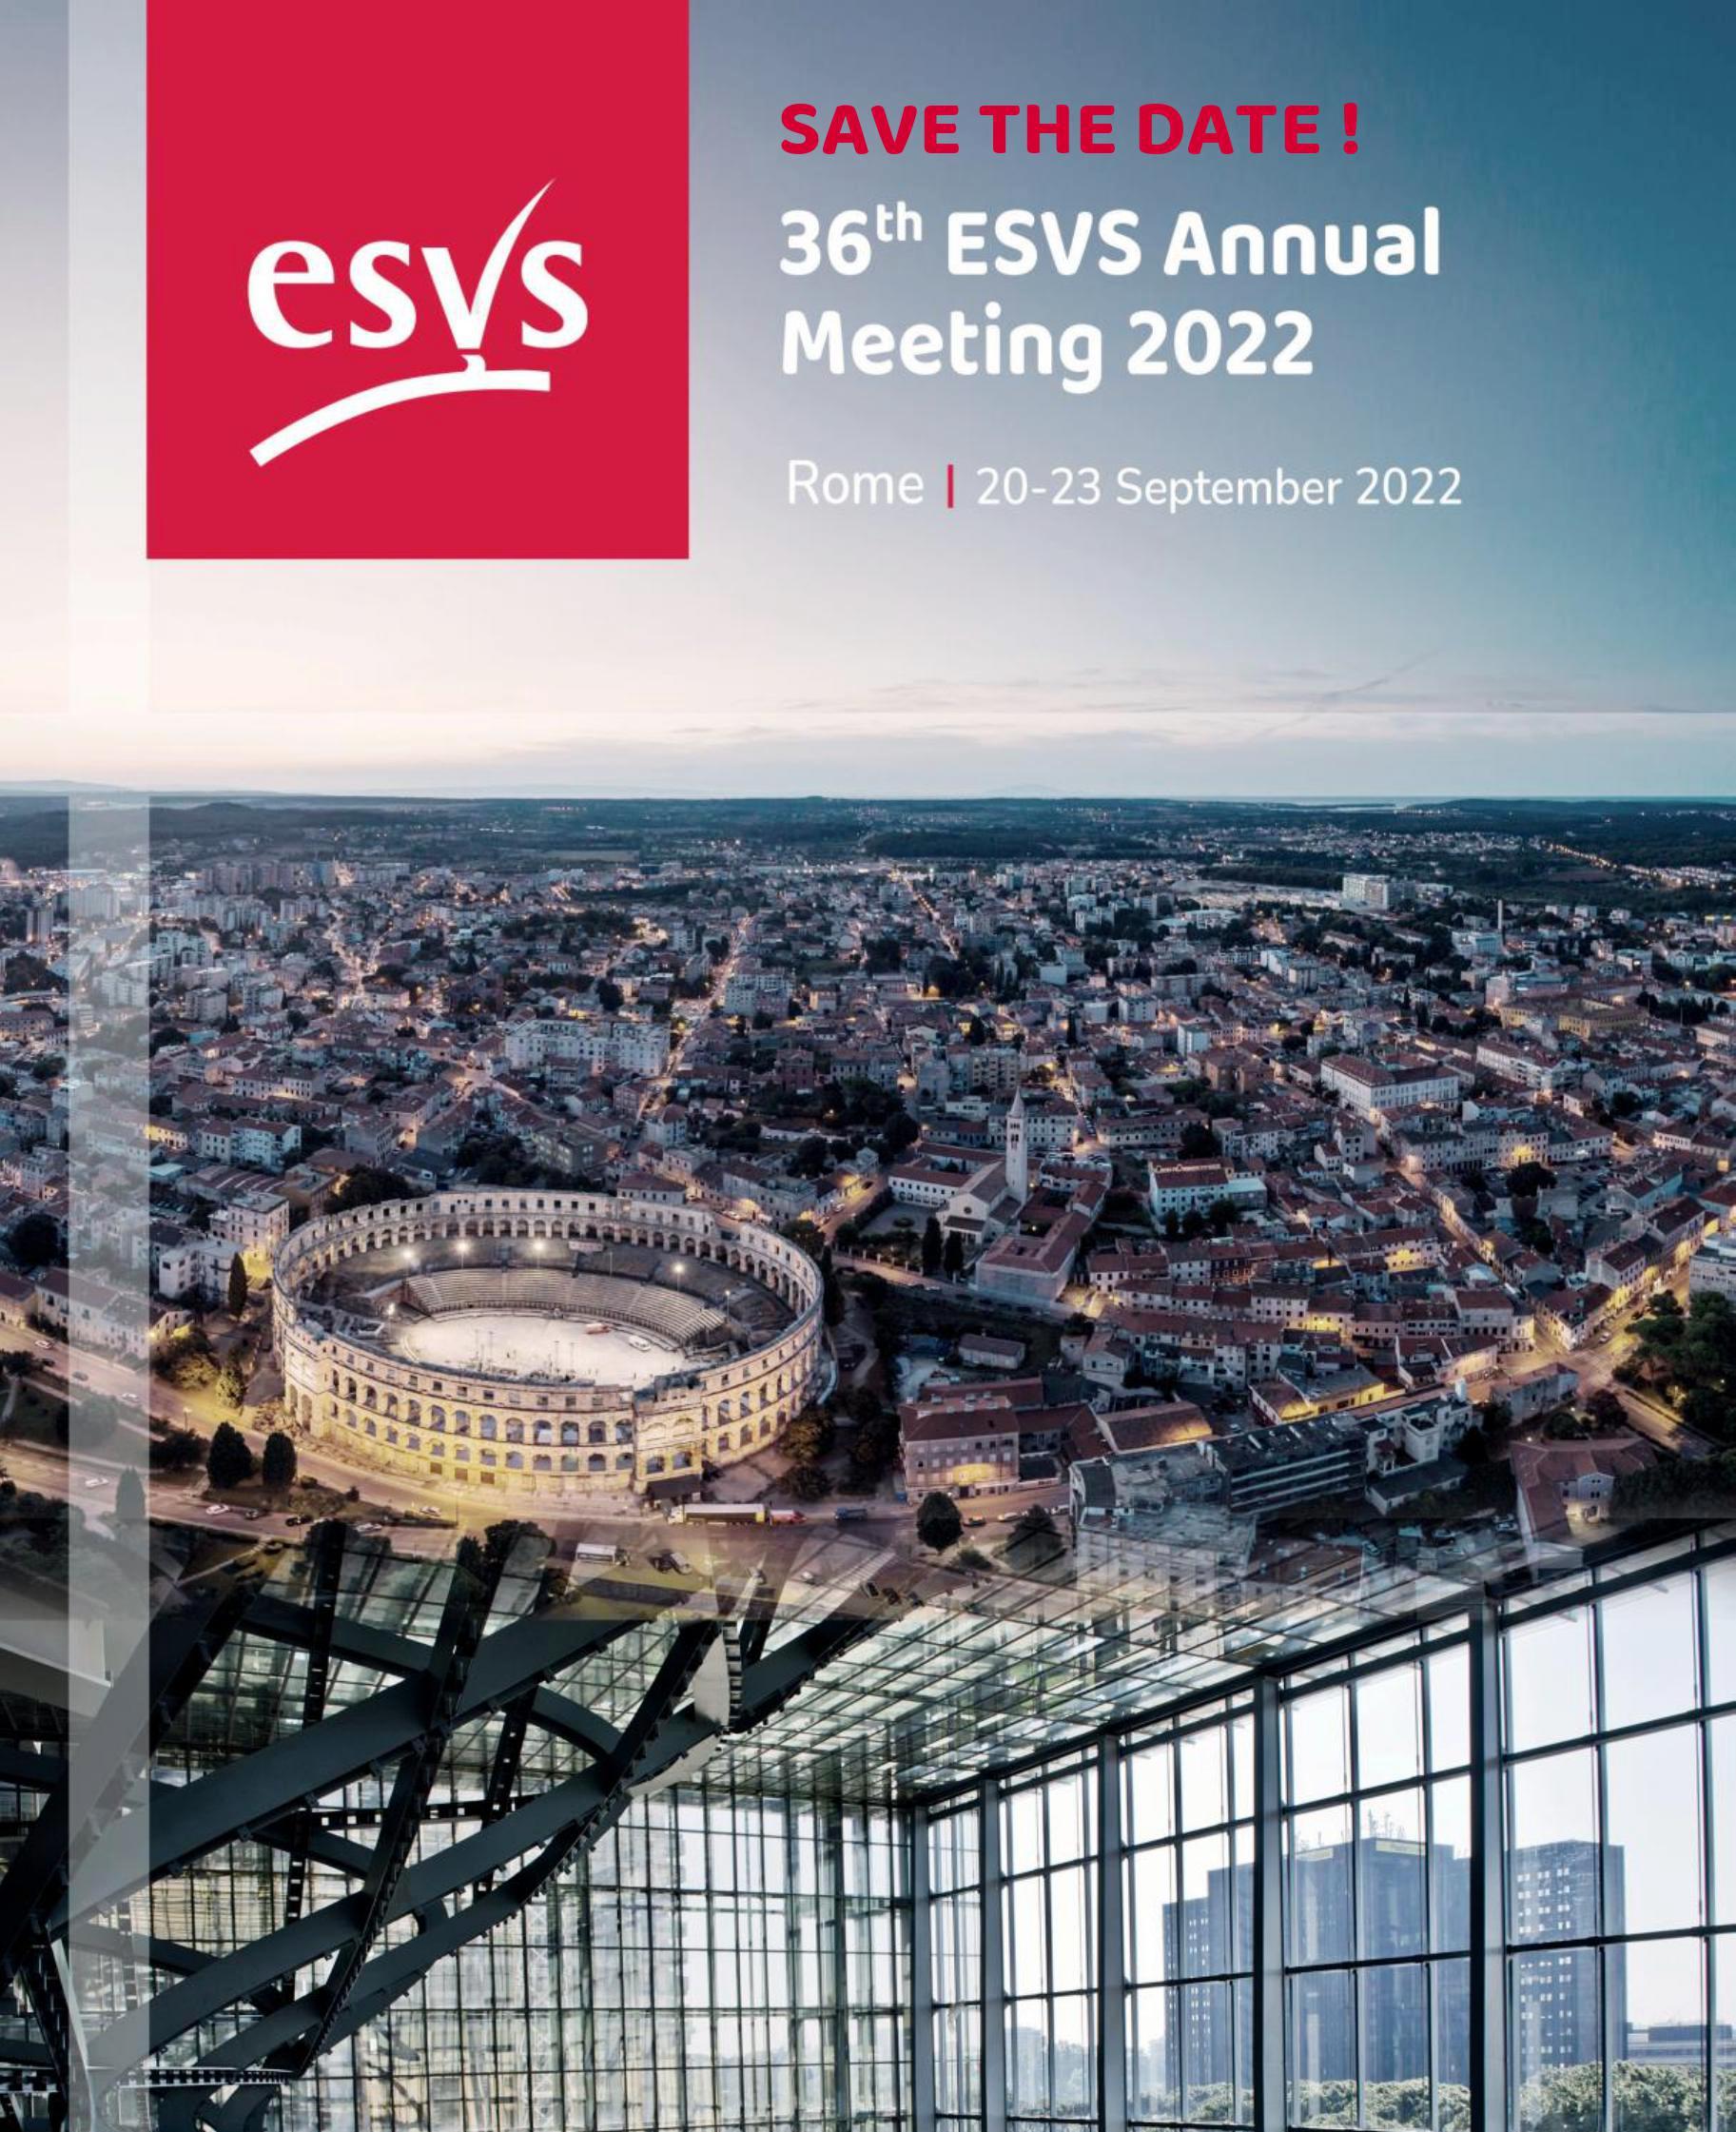 ESVS Annual Meeting 2022 Abstarct Submission closes: 1st of April, 2022